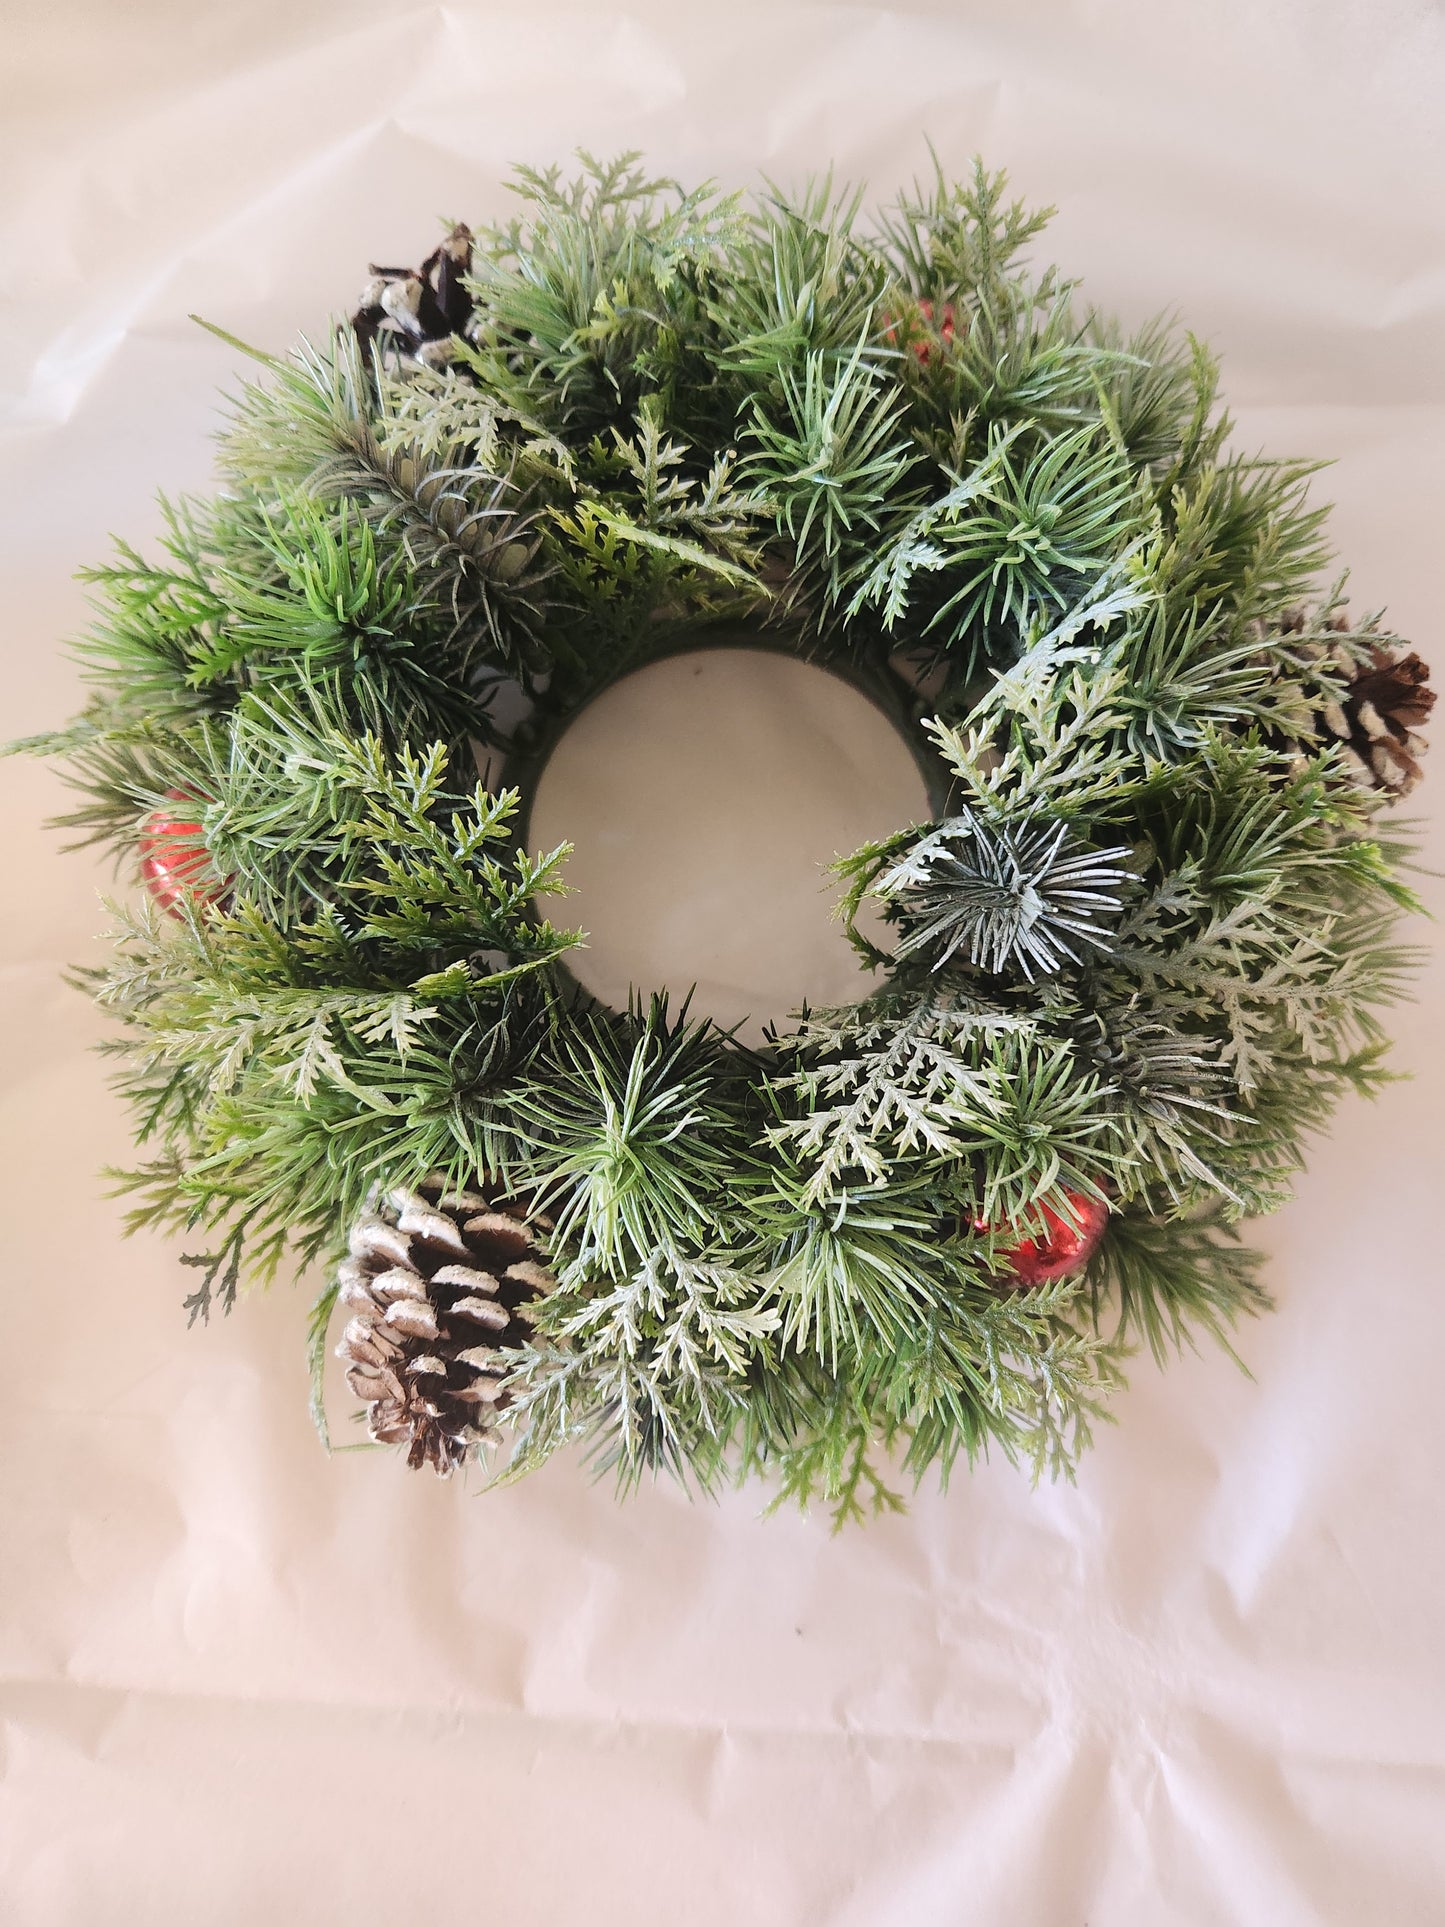 Candle Wreath (candle not included)